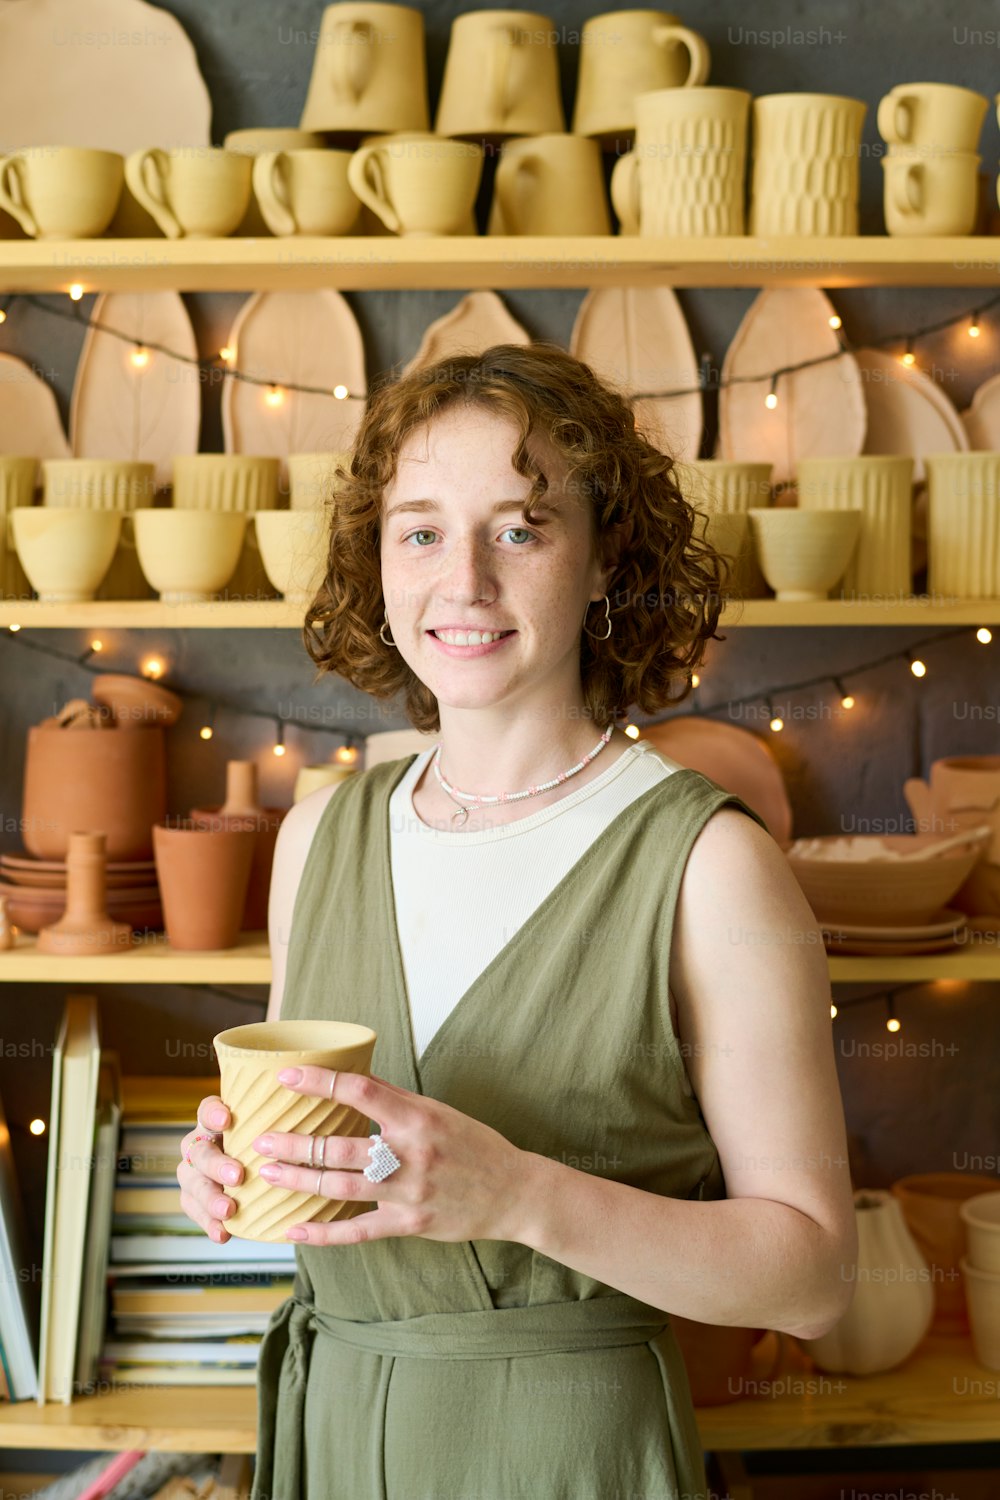 Young cheerful woman with handmade clay mug in hands standing by display with assortment of earthenware created for sale